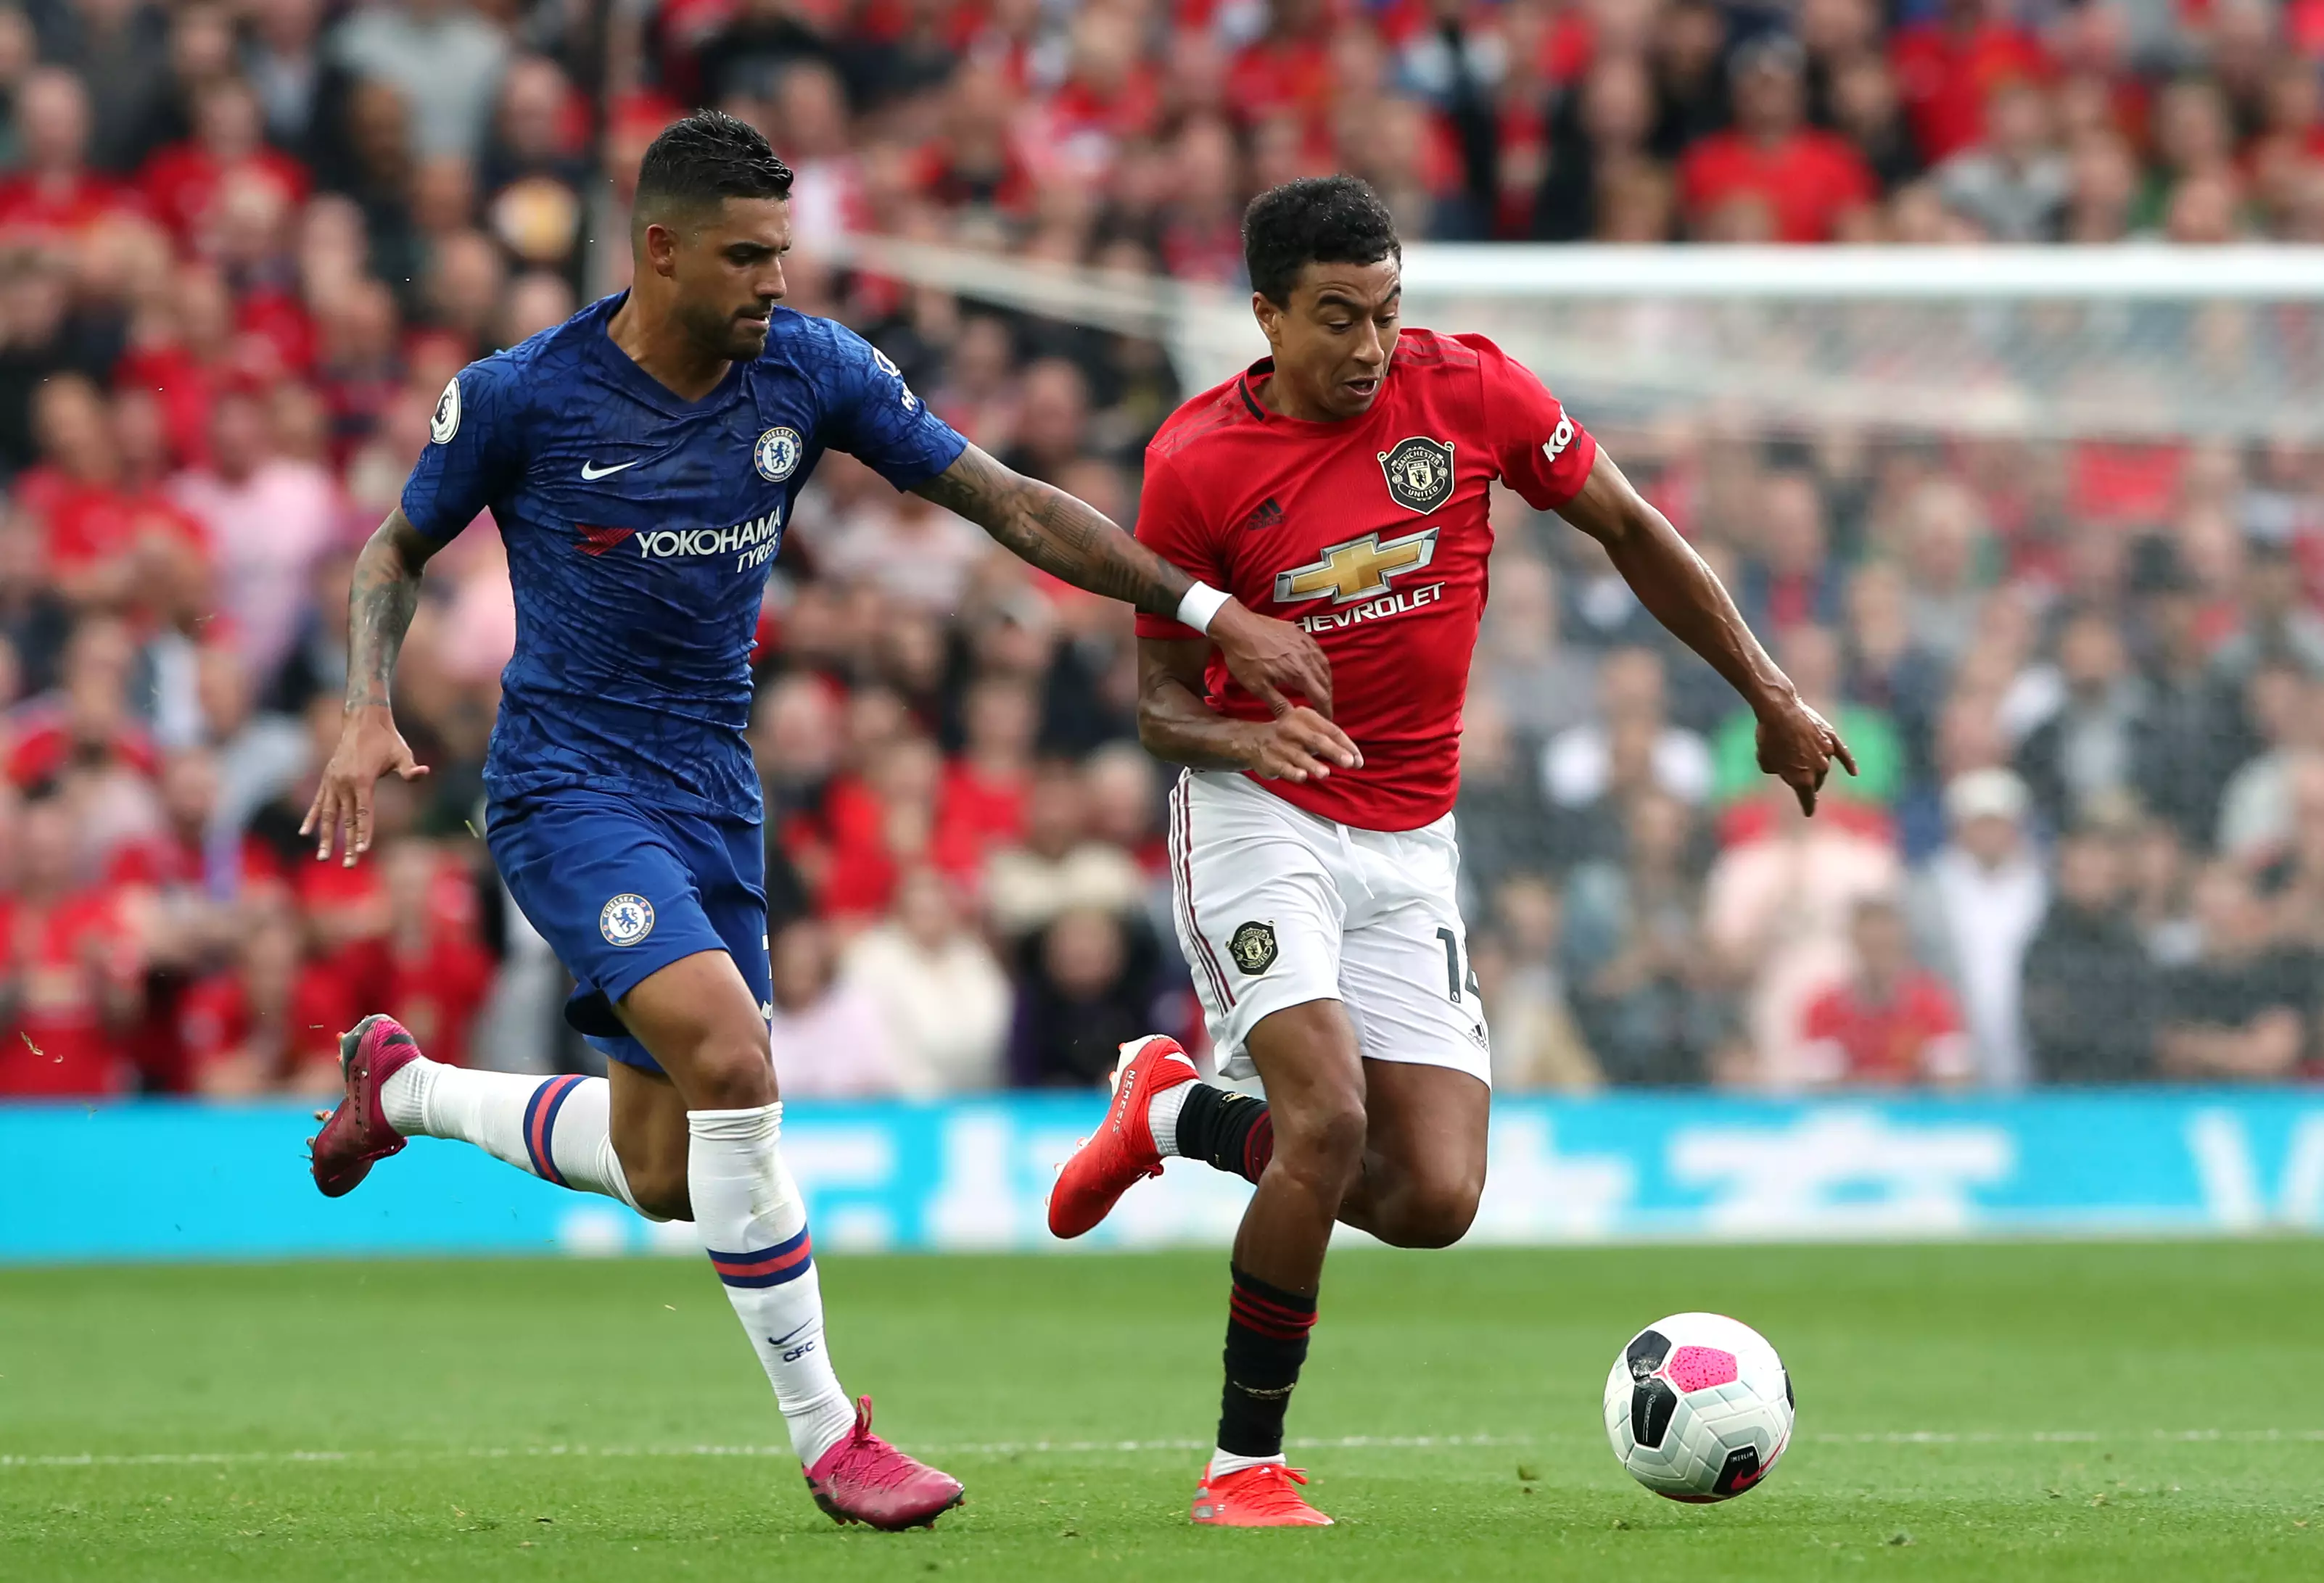 Jesse Lingard is without a goal or assist in the Premier League in 2019